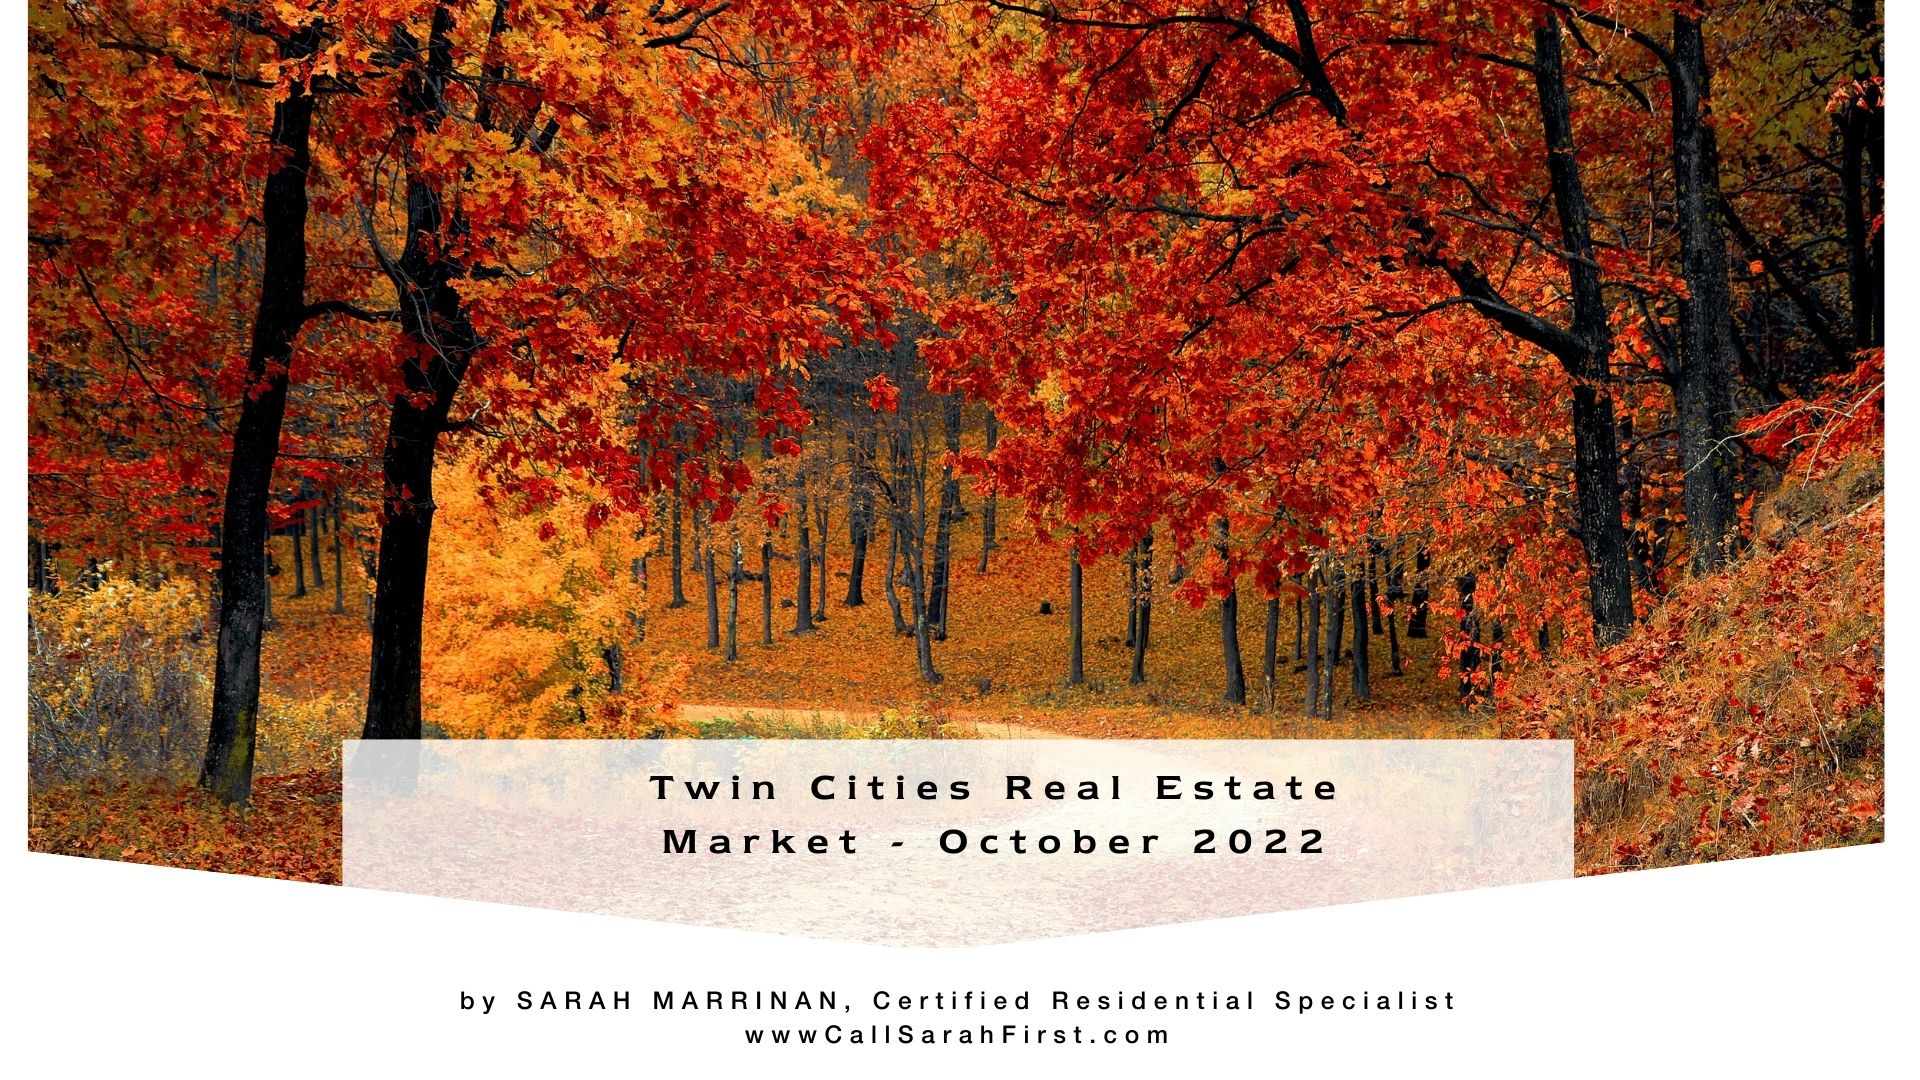 Twin Cities Real Estate Market - October 2022